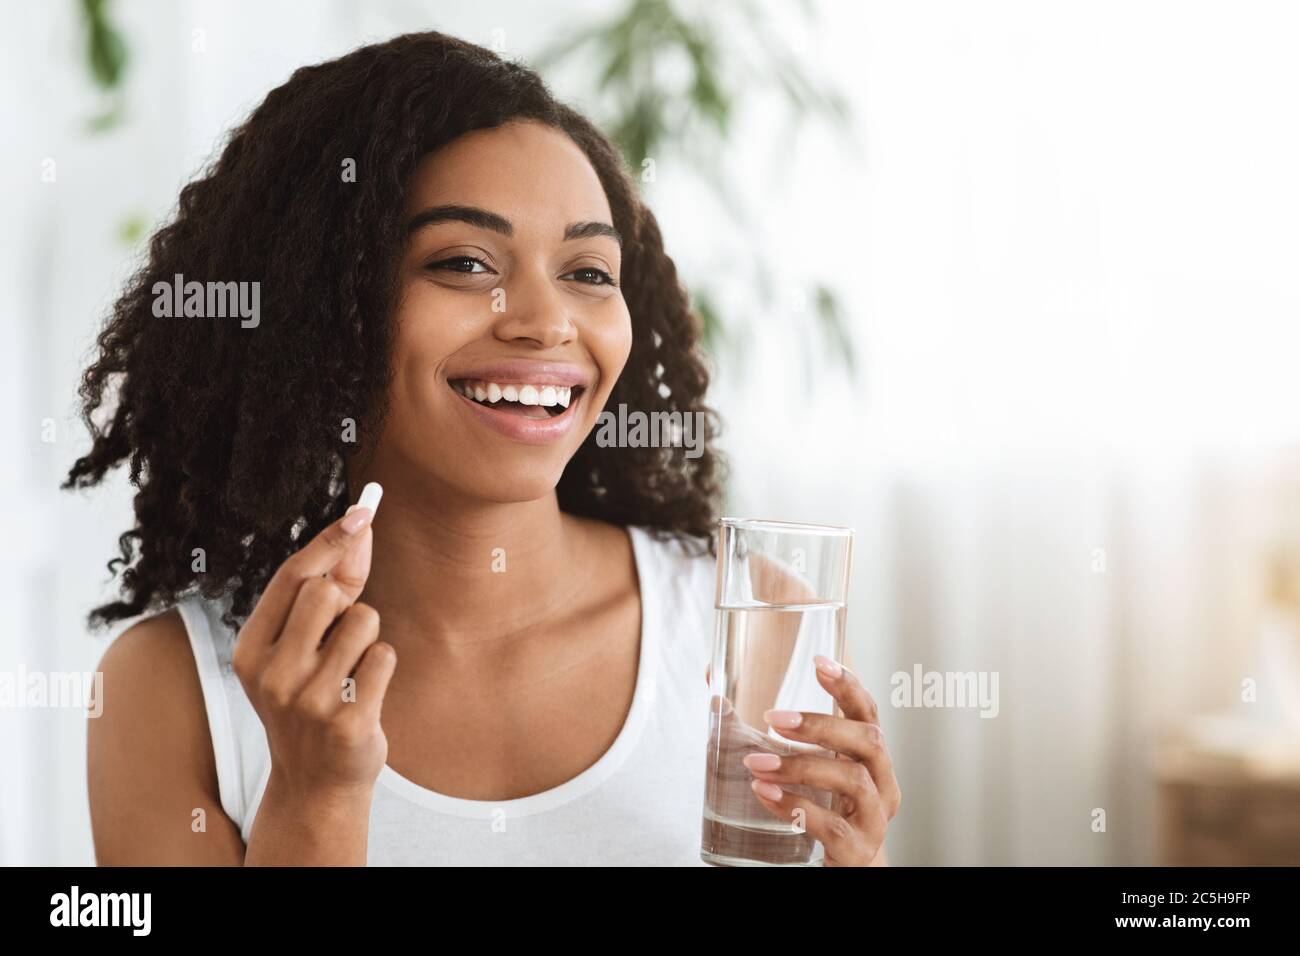 Healthy Diet Nutrition. Smiling Afro Woman Holding Vitamin Pill And Mineral Water Stock Photo